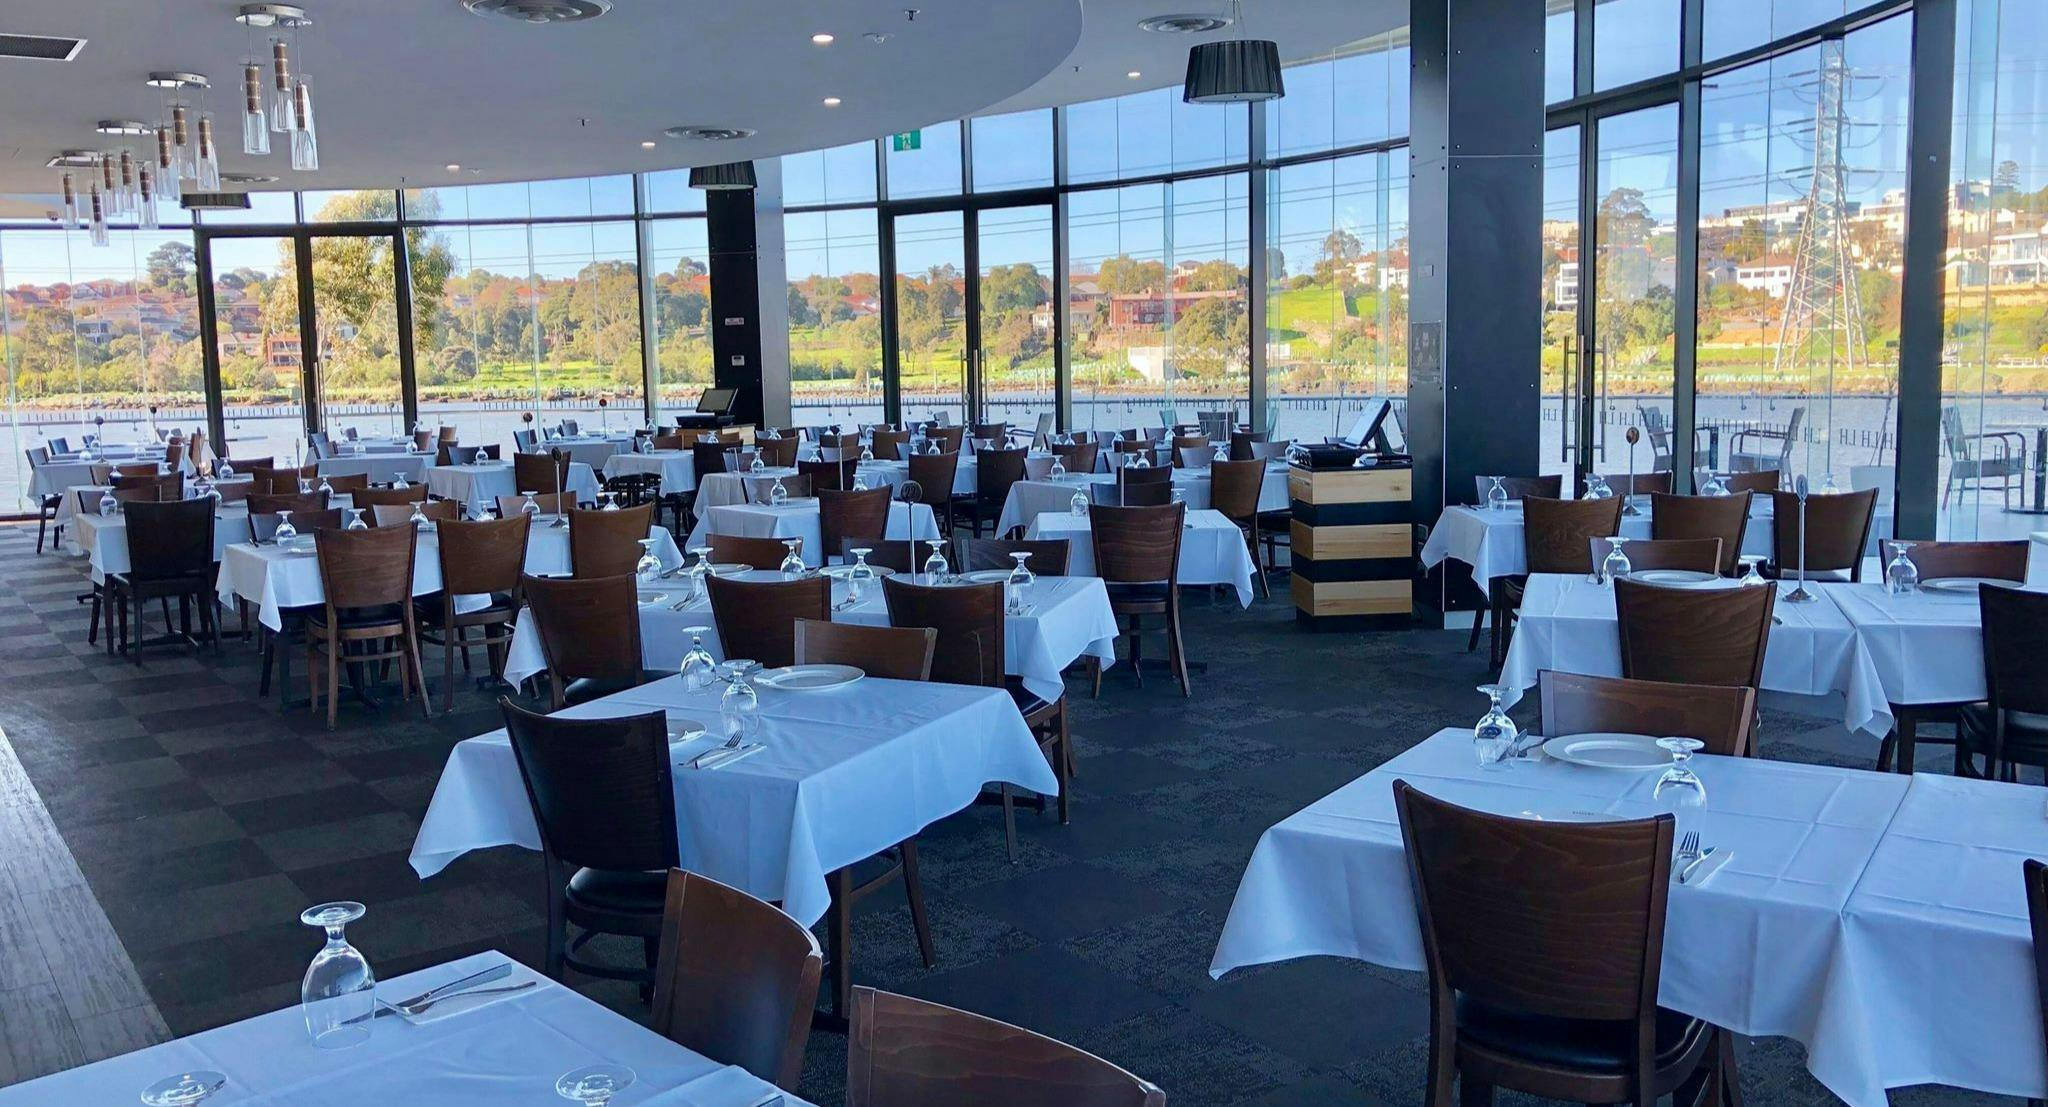 Photo of restaurant Riviera Cafe and Restaurant in Maribyrnong, Melbourne